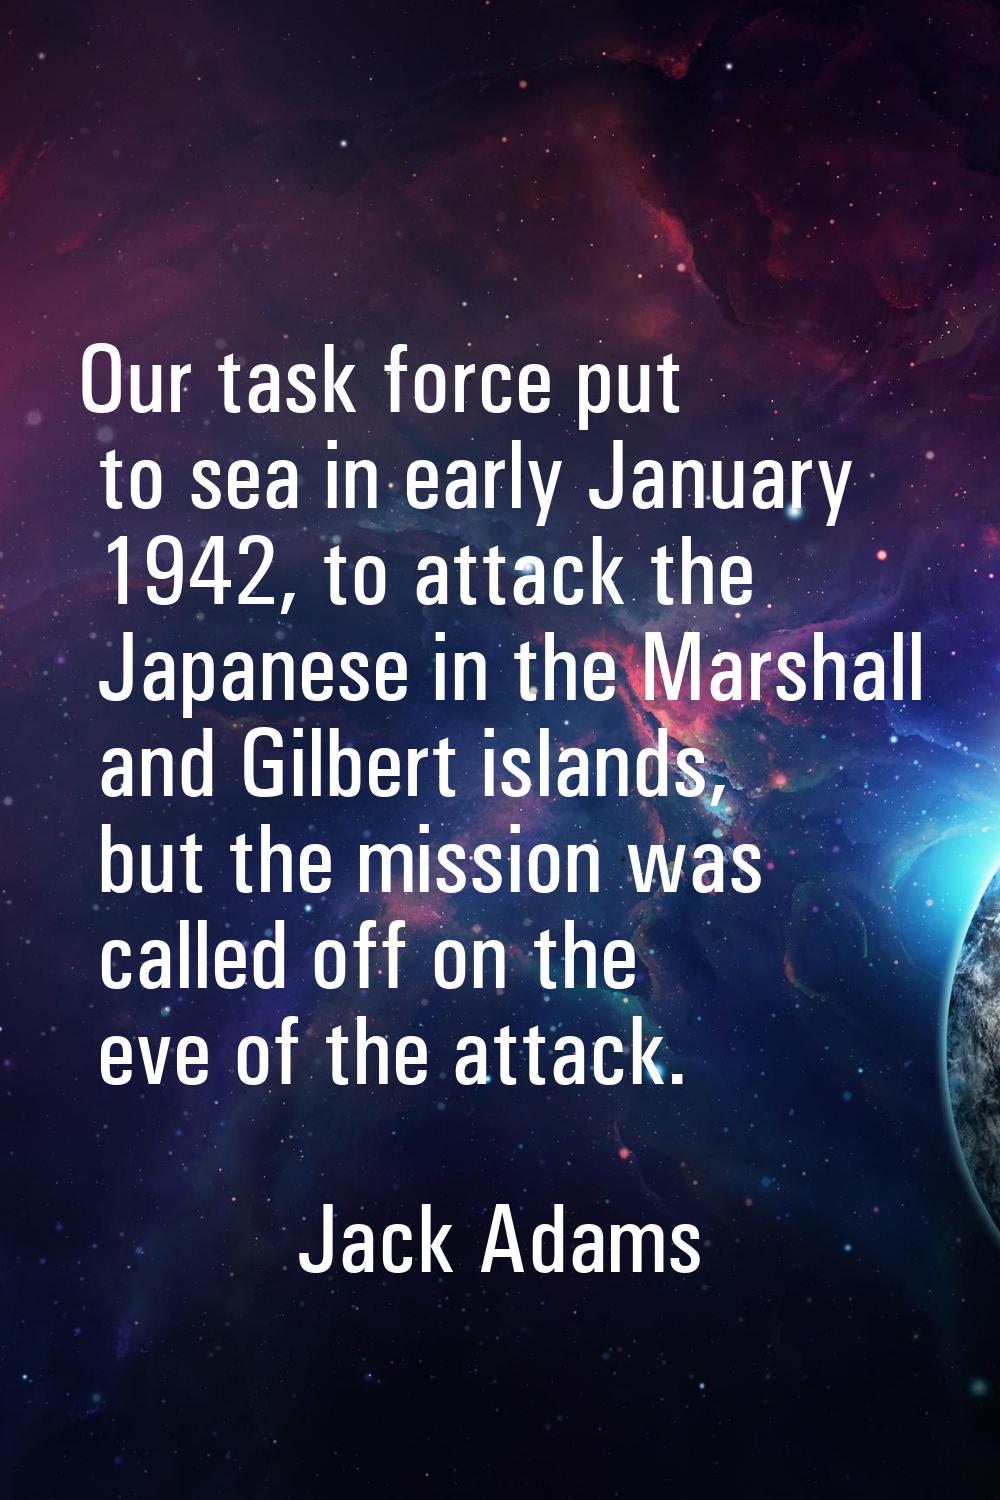 Our task force put to sea in early January 1942, to attack the Japanese in the Marshall and Gilbert